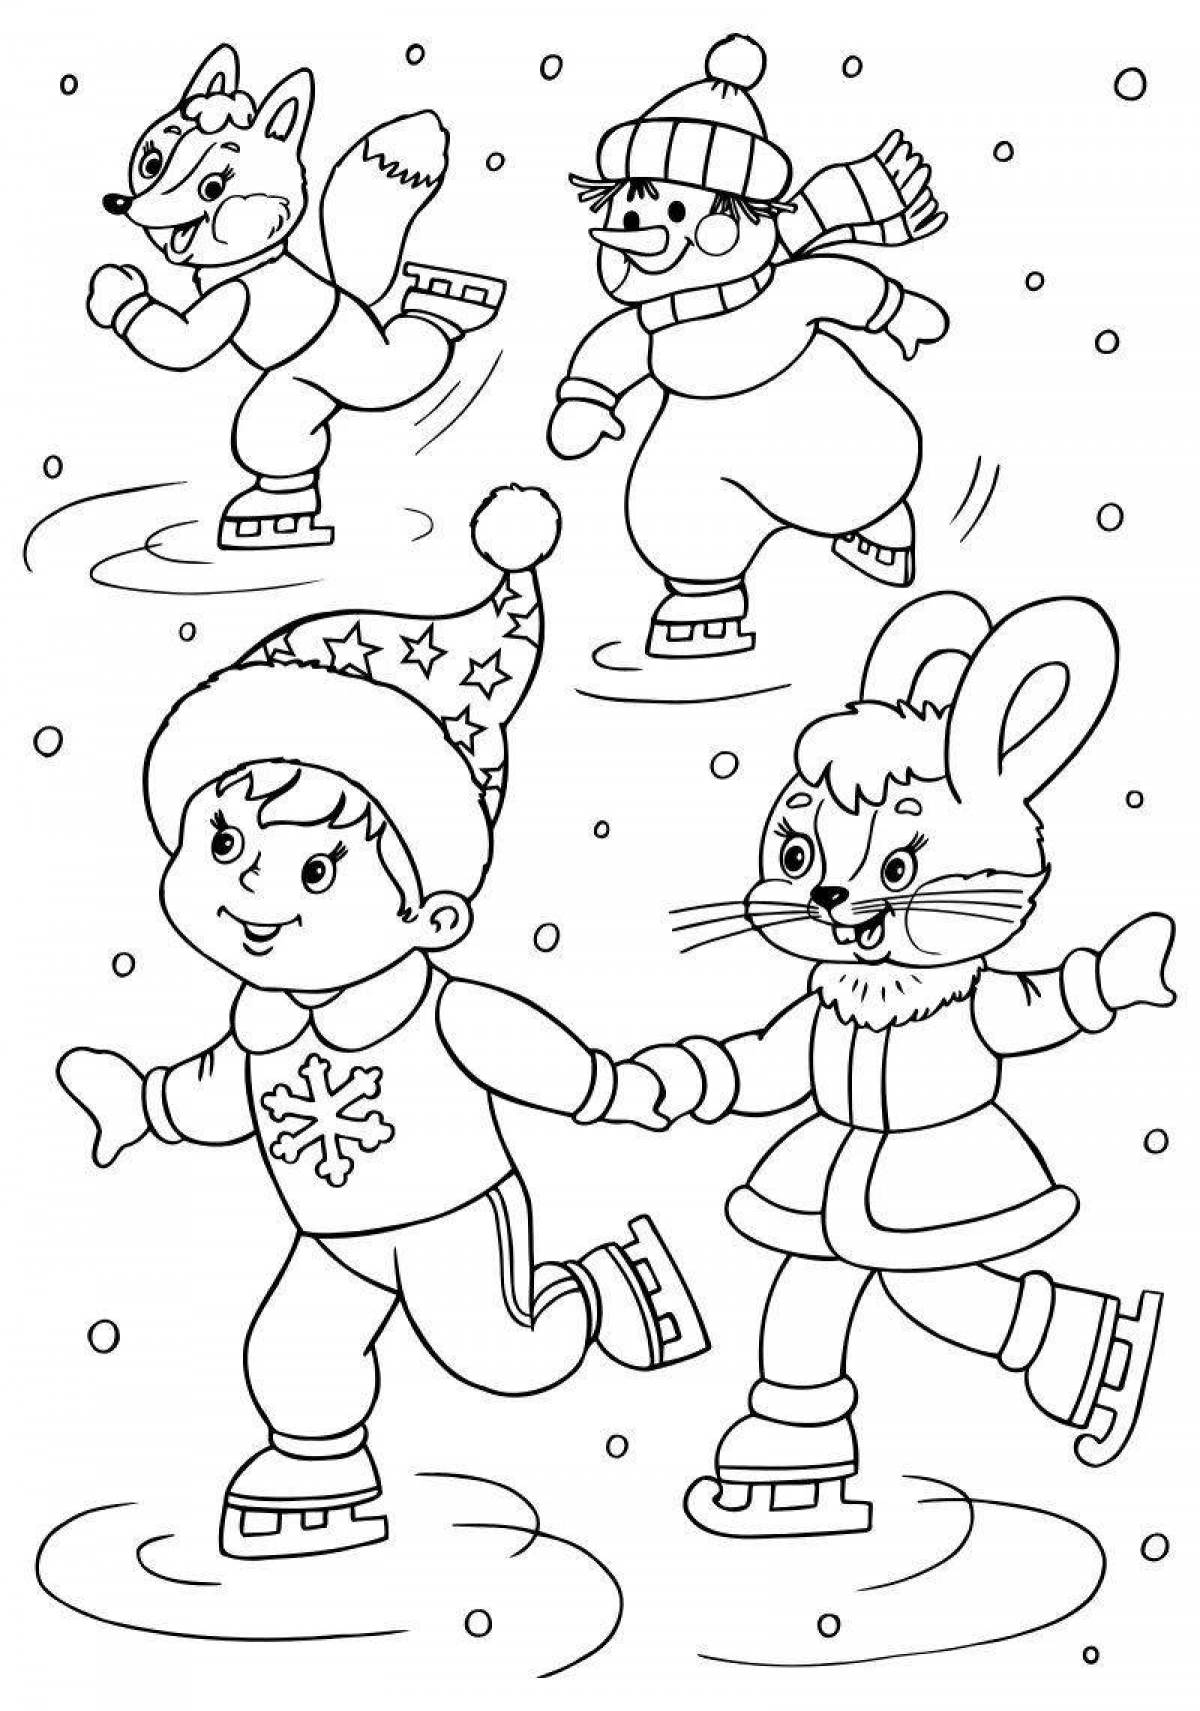 Bright winter coloring book for children 5 years old